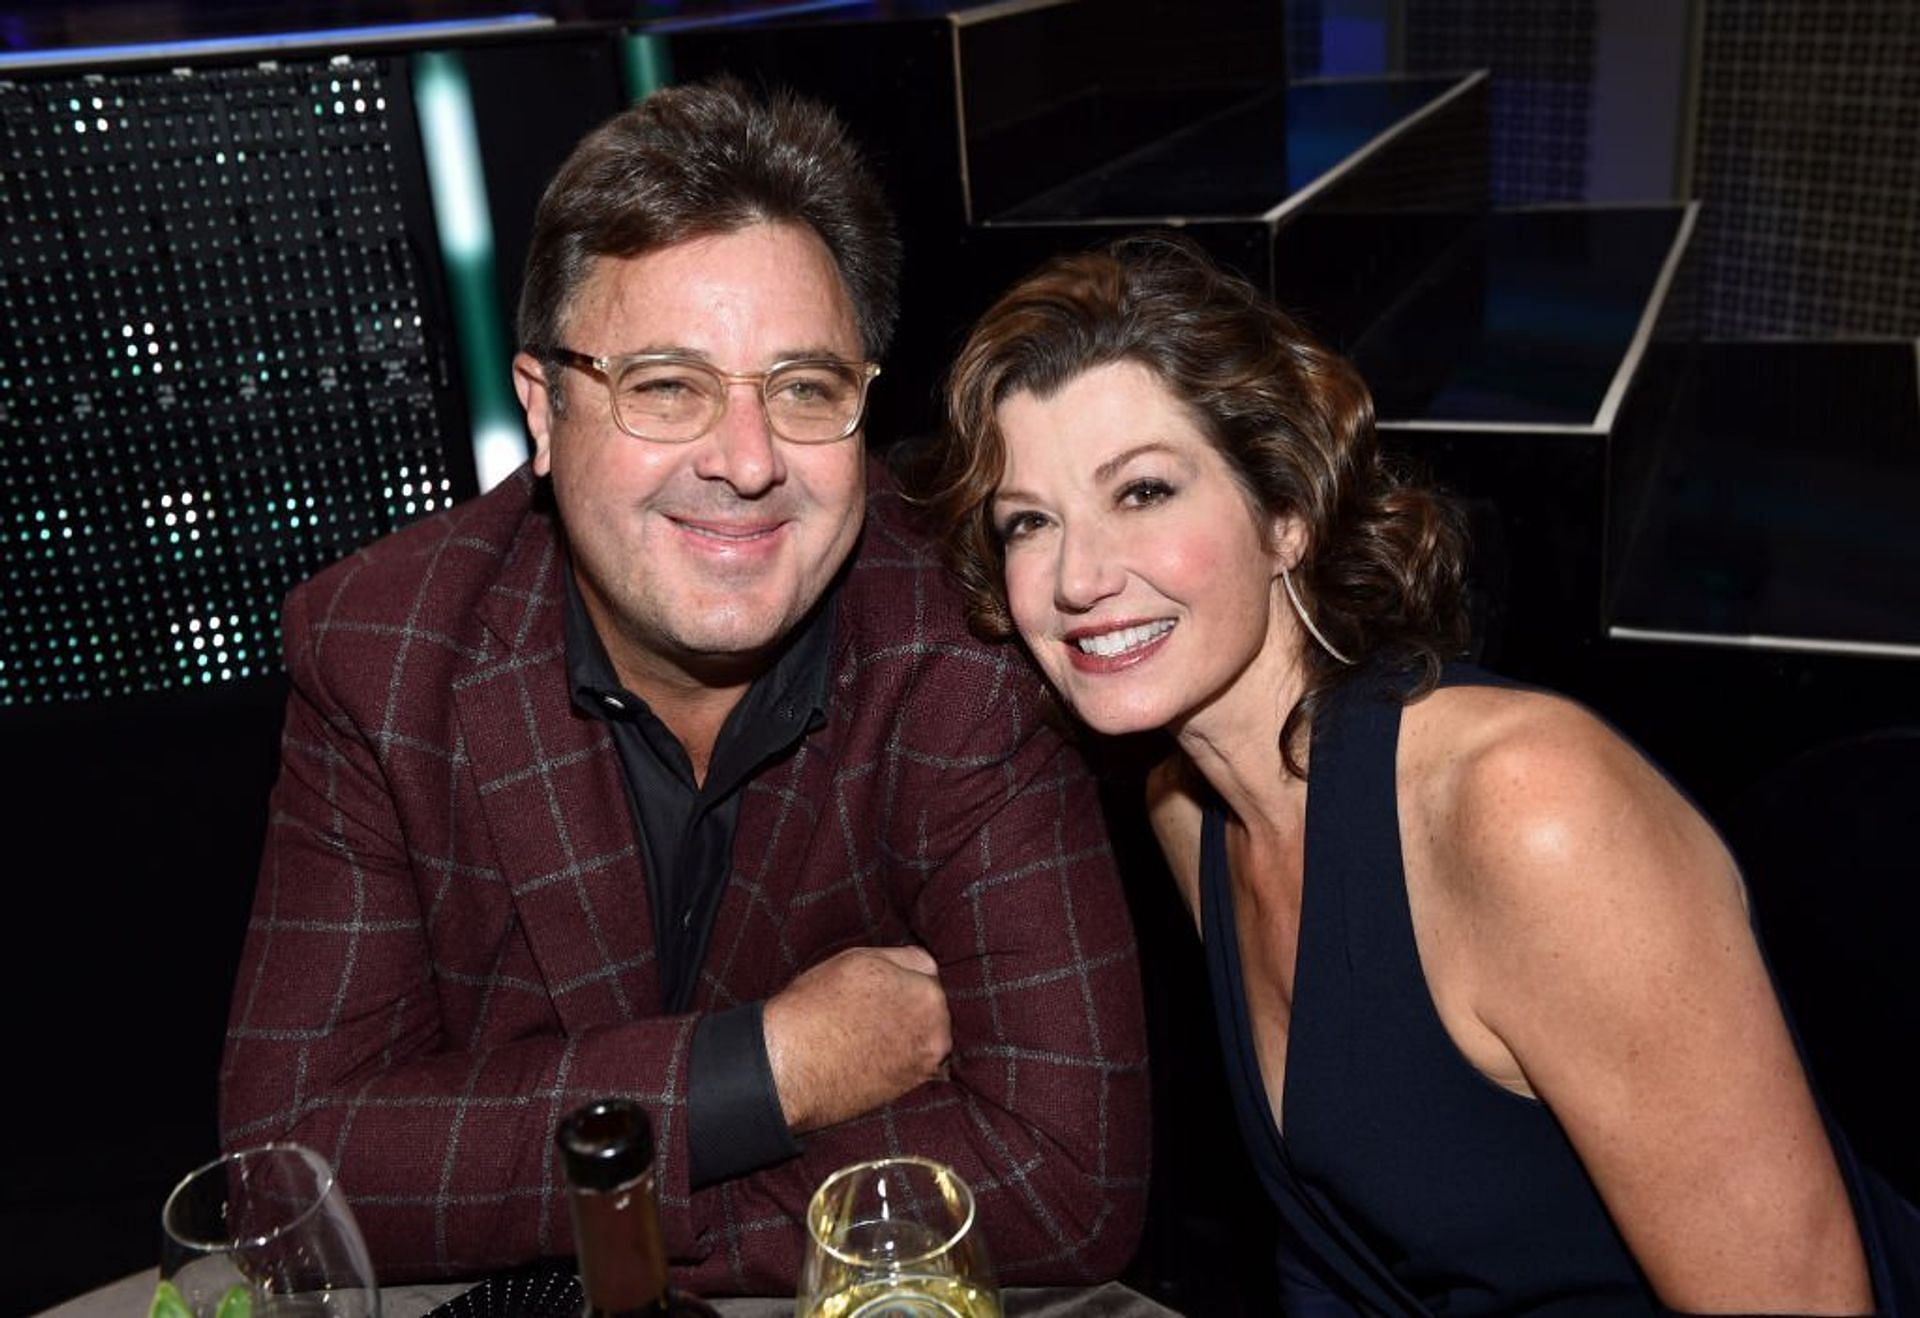 Vince Gill paid tribute to his wife Amy Grant, who is currently recovering from her injury (Image via John Shearer/Getty Images)